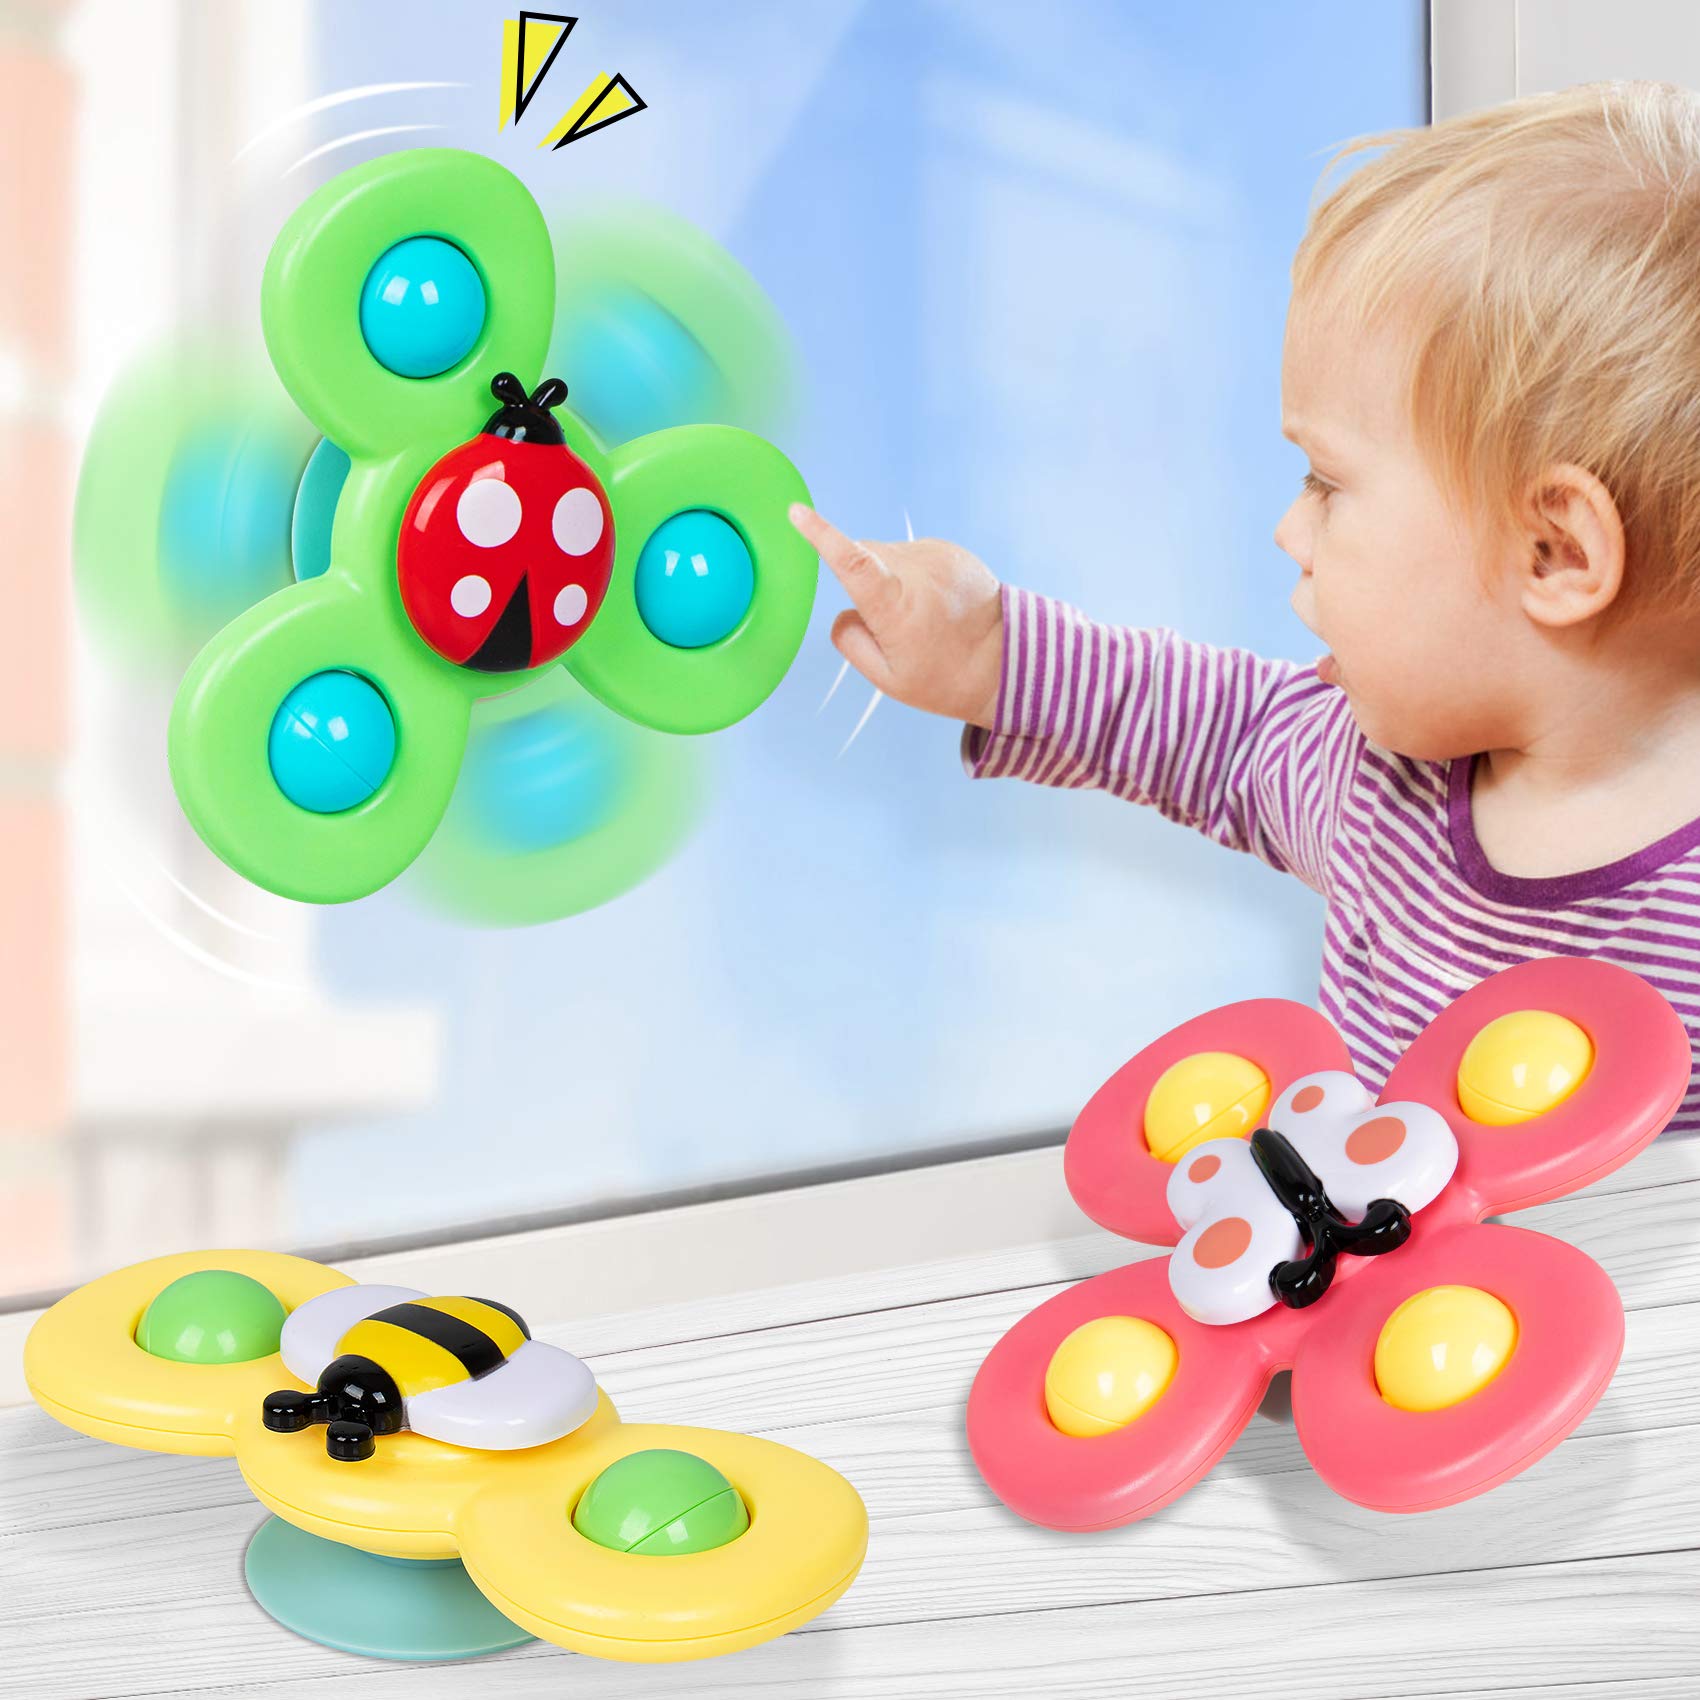 Narrio Suction Cup Spinning Top Toy